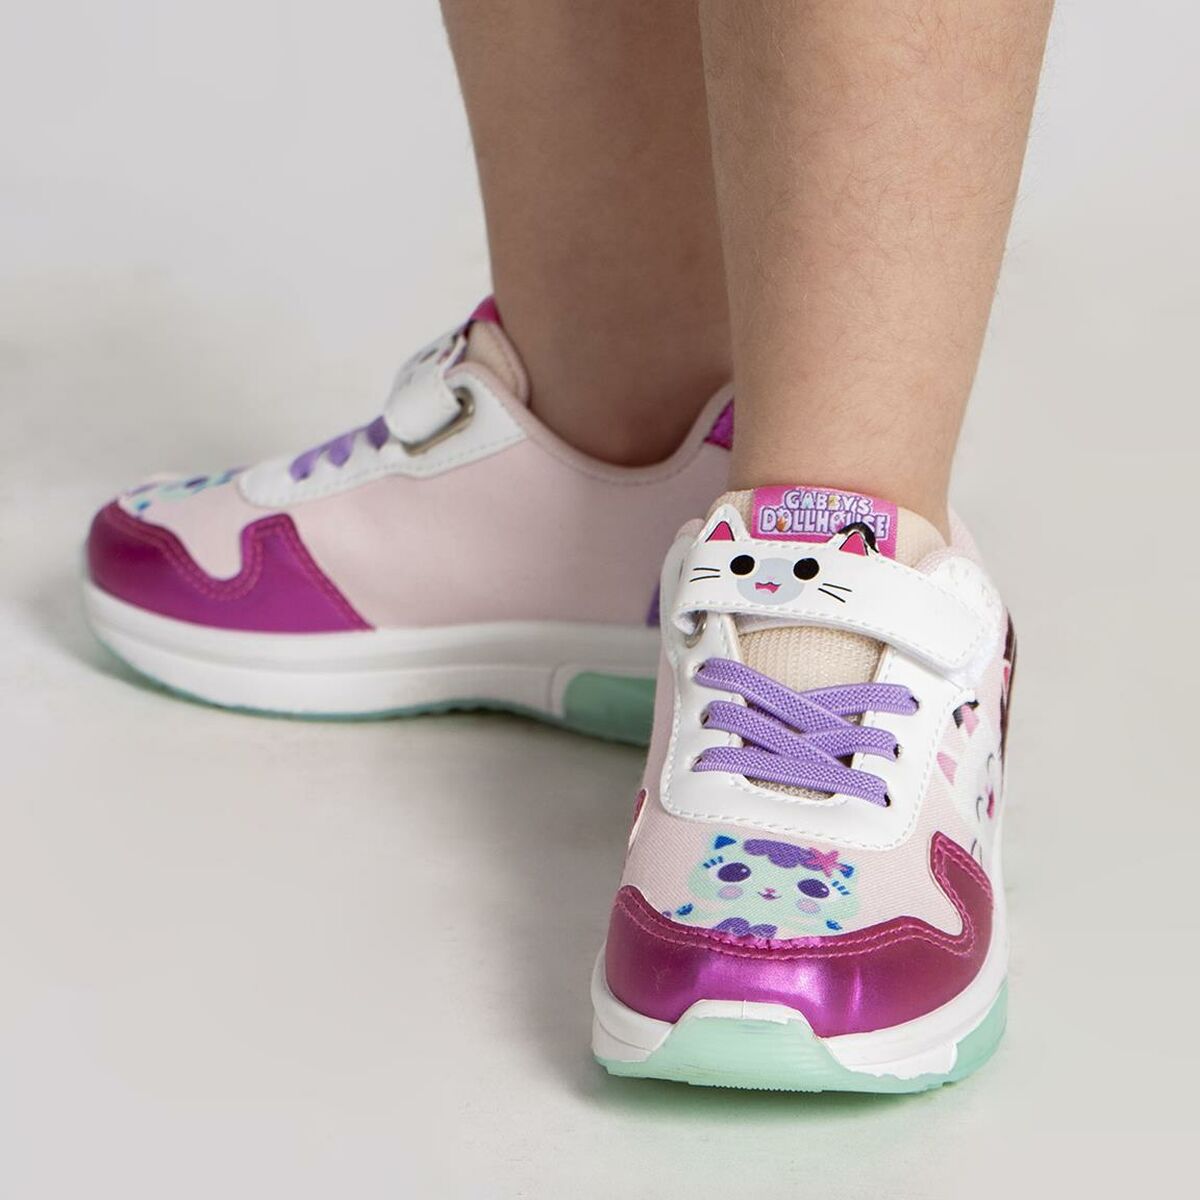 LED Trainers Gabby's Dollhouse Pink